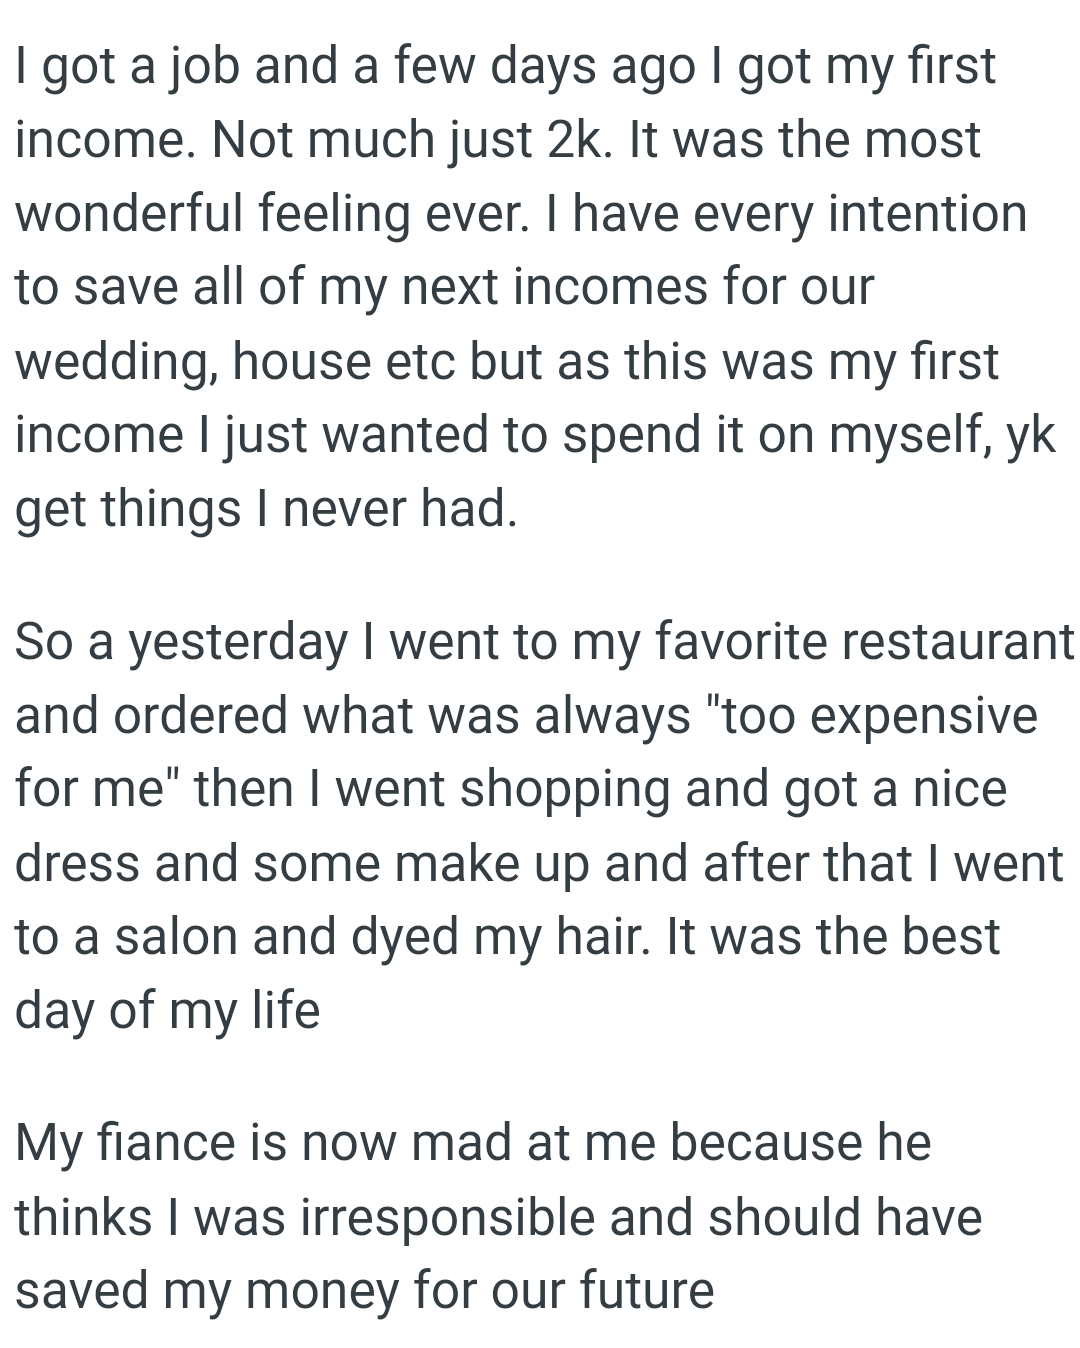 OP went to her favorite restaurant and ordered what was always too expensive for her